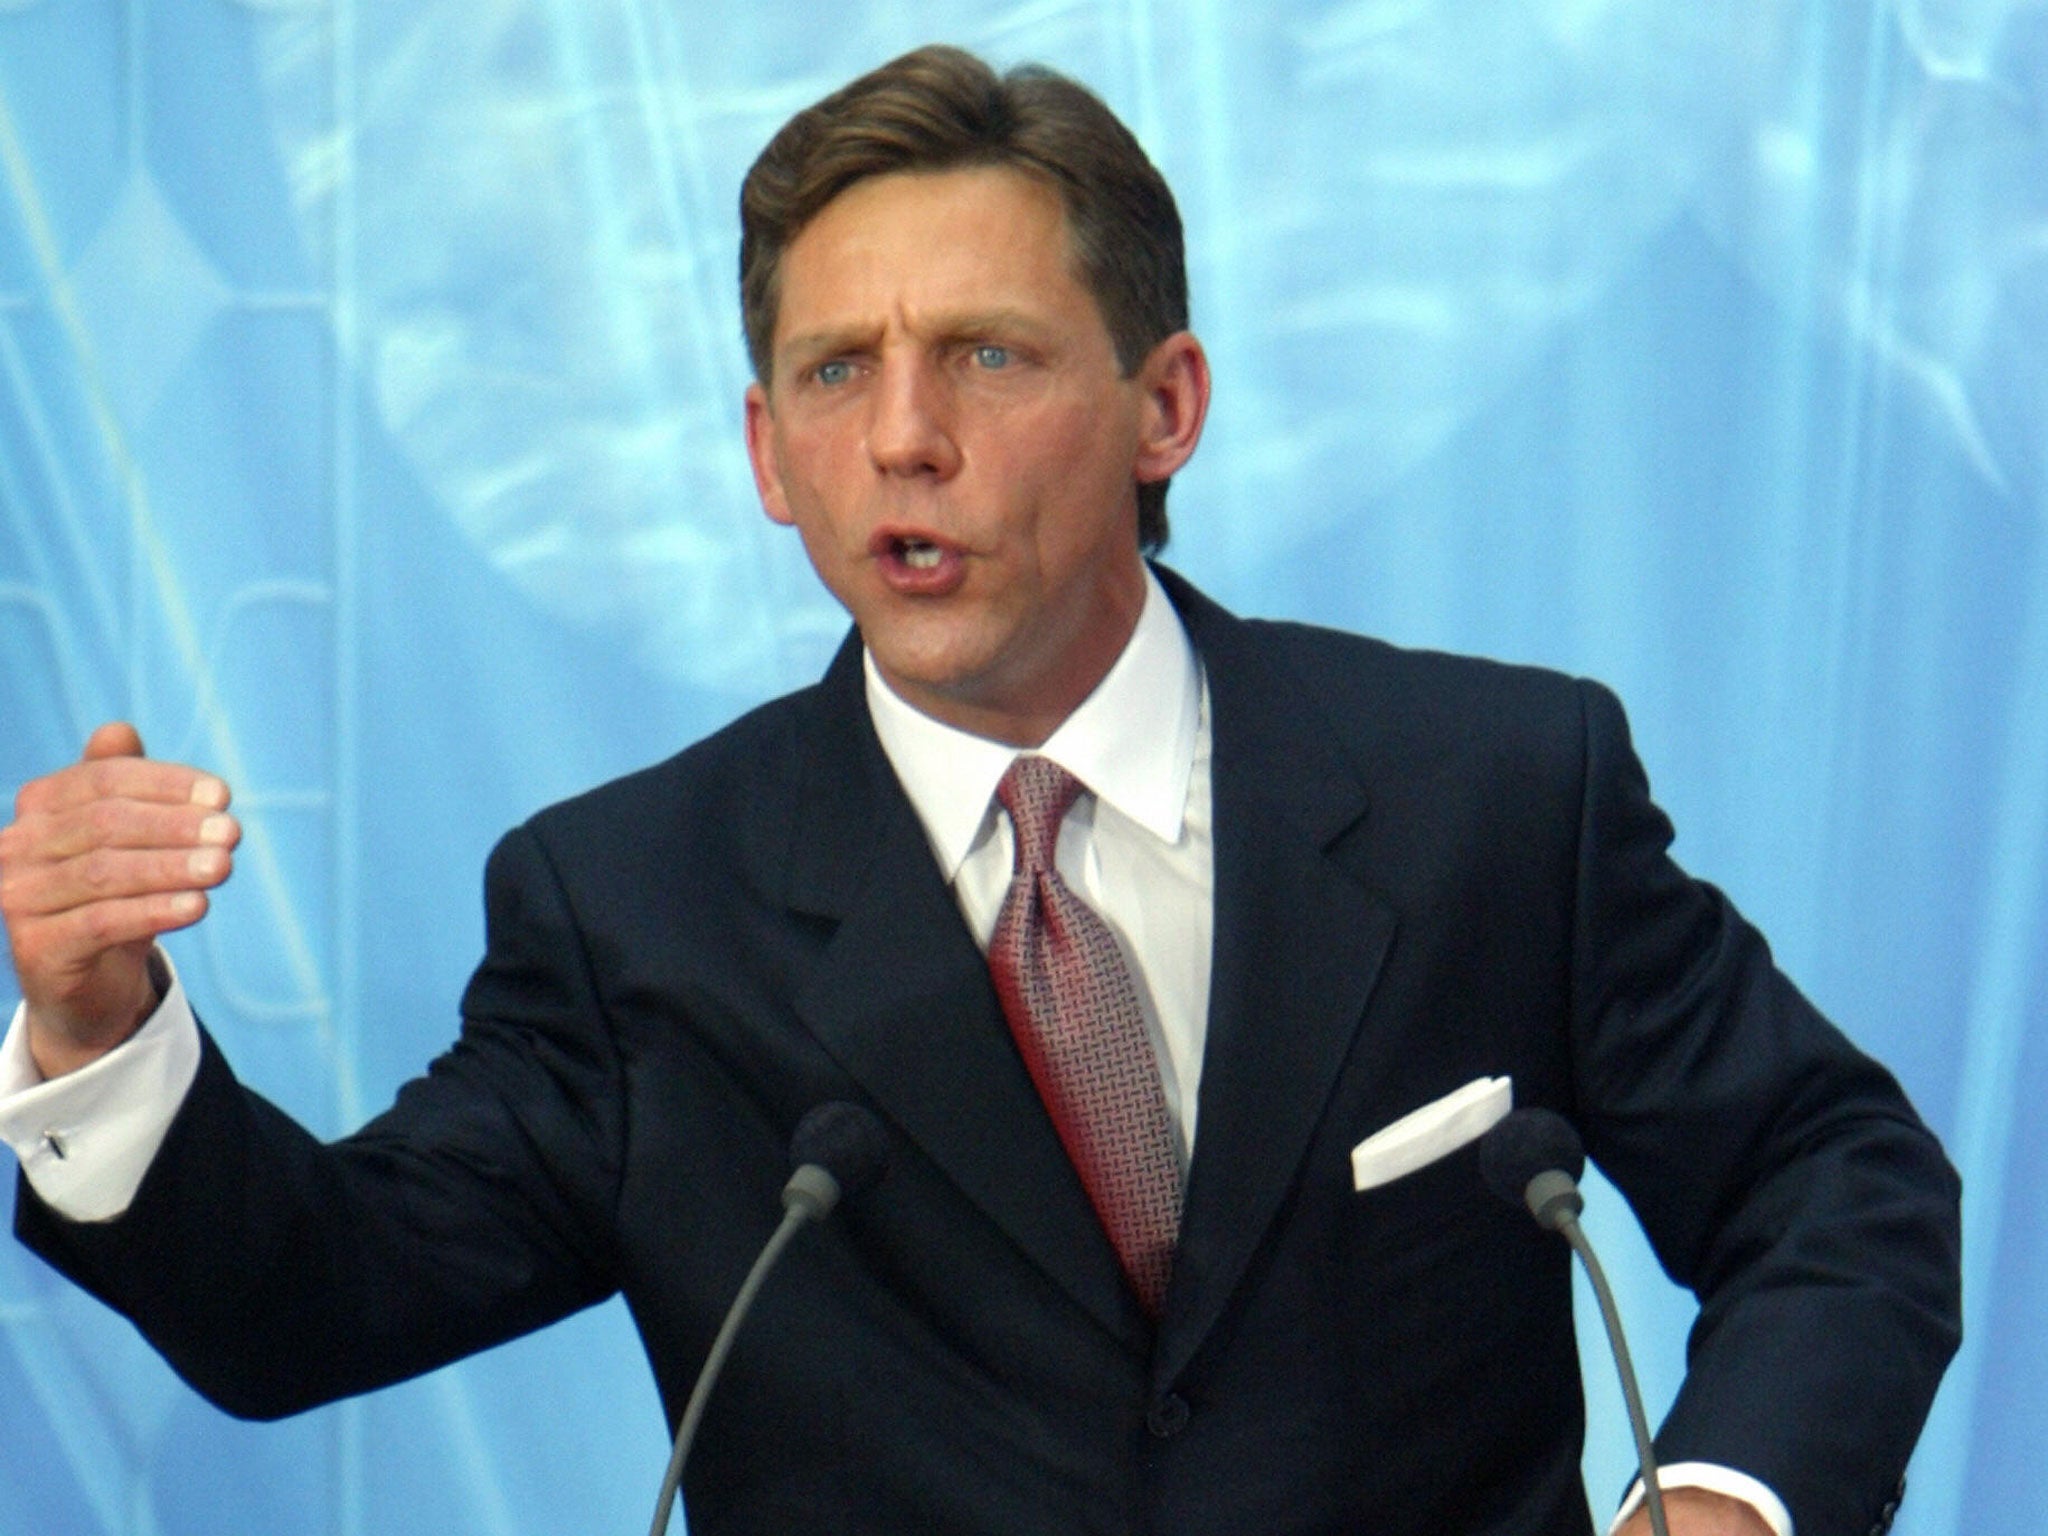 The leader of the Church of Scientology, David Miscavige. Tom Cruise ranks behind him as perhaps the church's second most-powerful person (Getty)